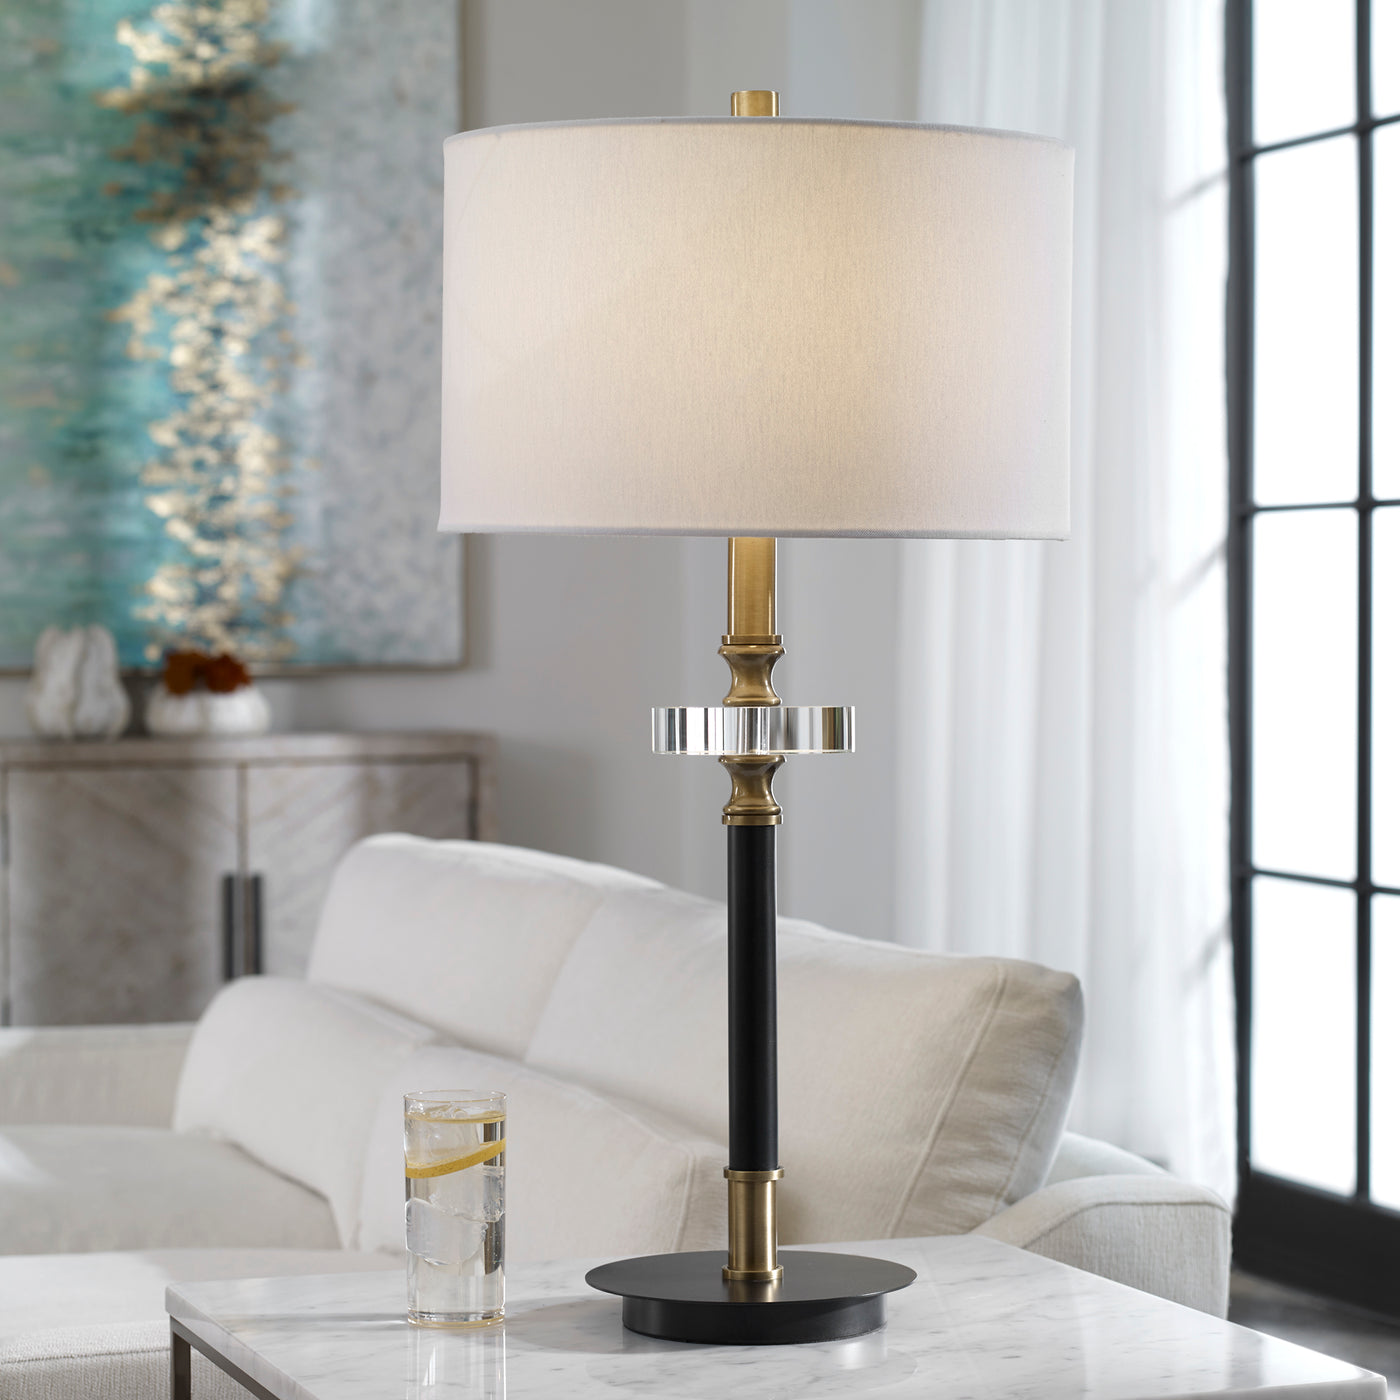 Traditional Elegance Is Showcased In This Table Lamp, Finished In An Aged Black With Antique Brass Plated Accents And A Th...